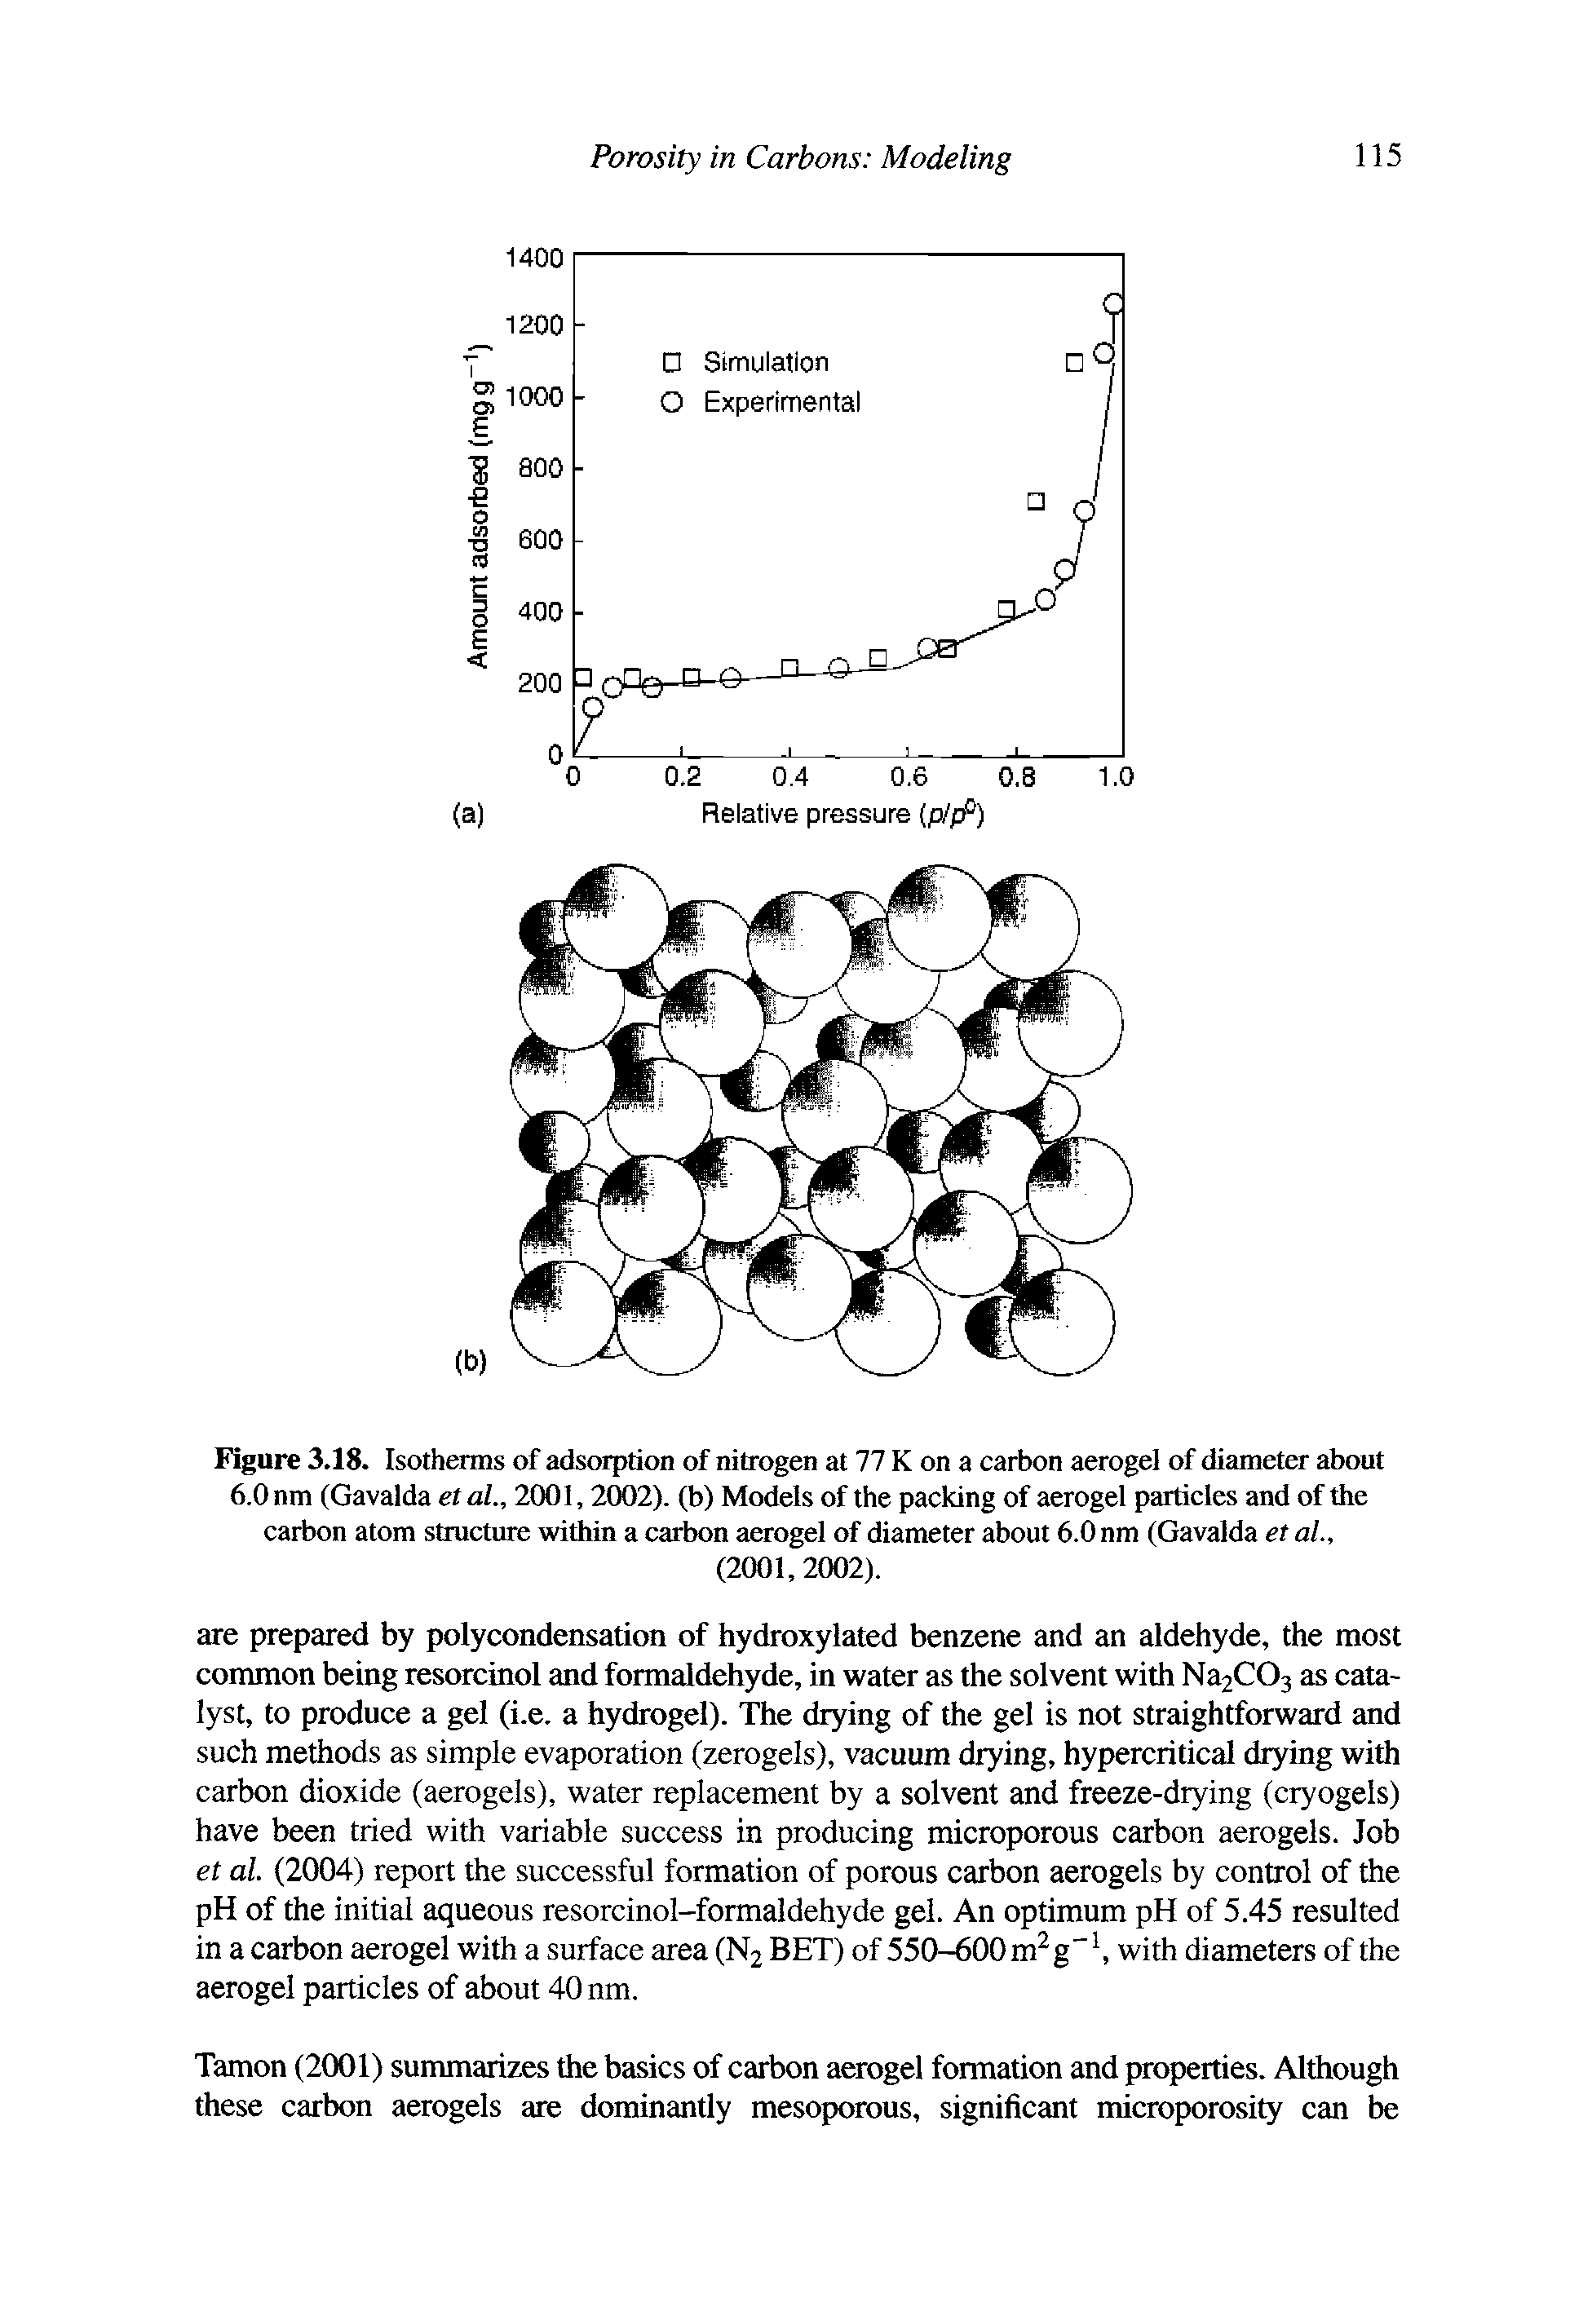 Figure 3.18. Isotherms of adsorption of nitrogen at 77 K on a carbon aerogel of diameter about 6.0 nm (Gavalda etal., 2001,2002). (b) Models of the packing of aerogel particles and of the carbon atom structure within a carbon aerogel of diameter about 6.0 nm (Gavalda et al.,...